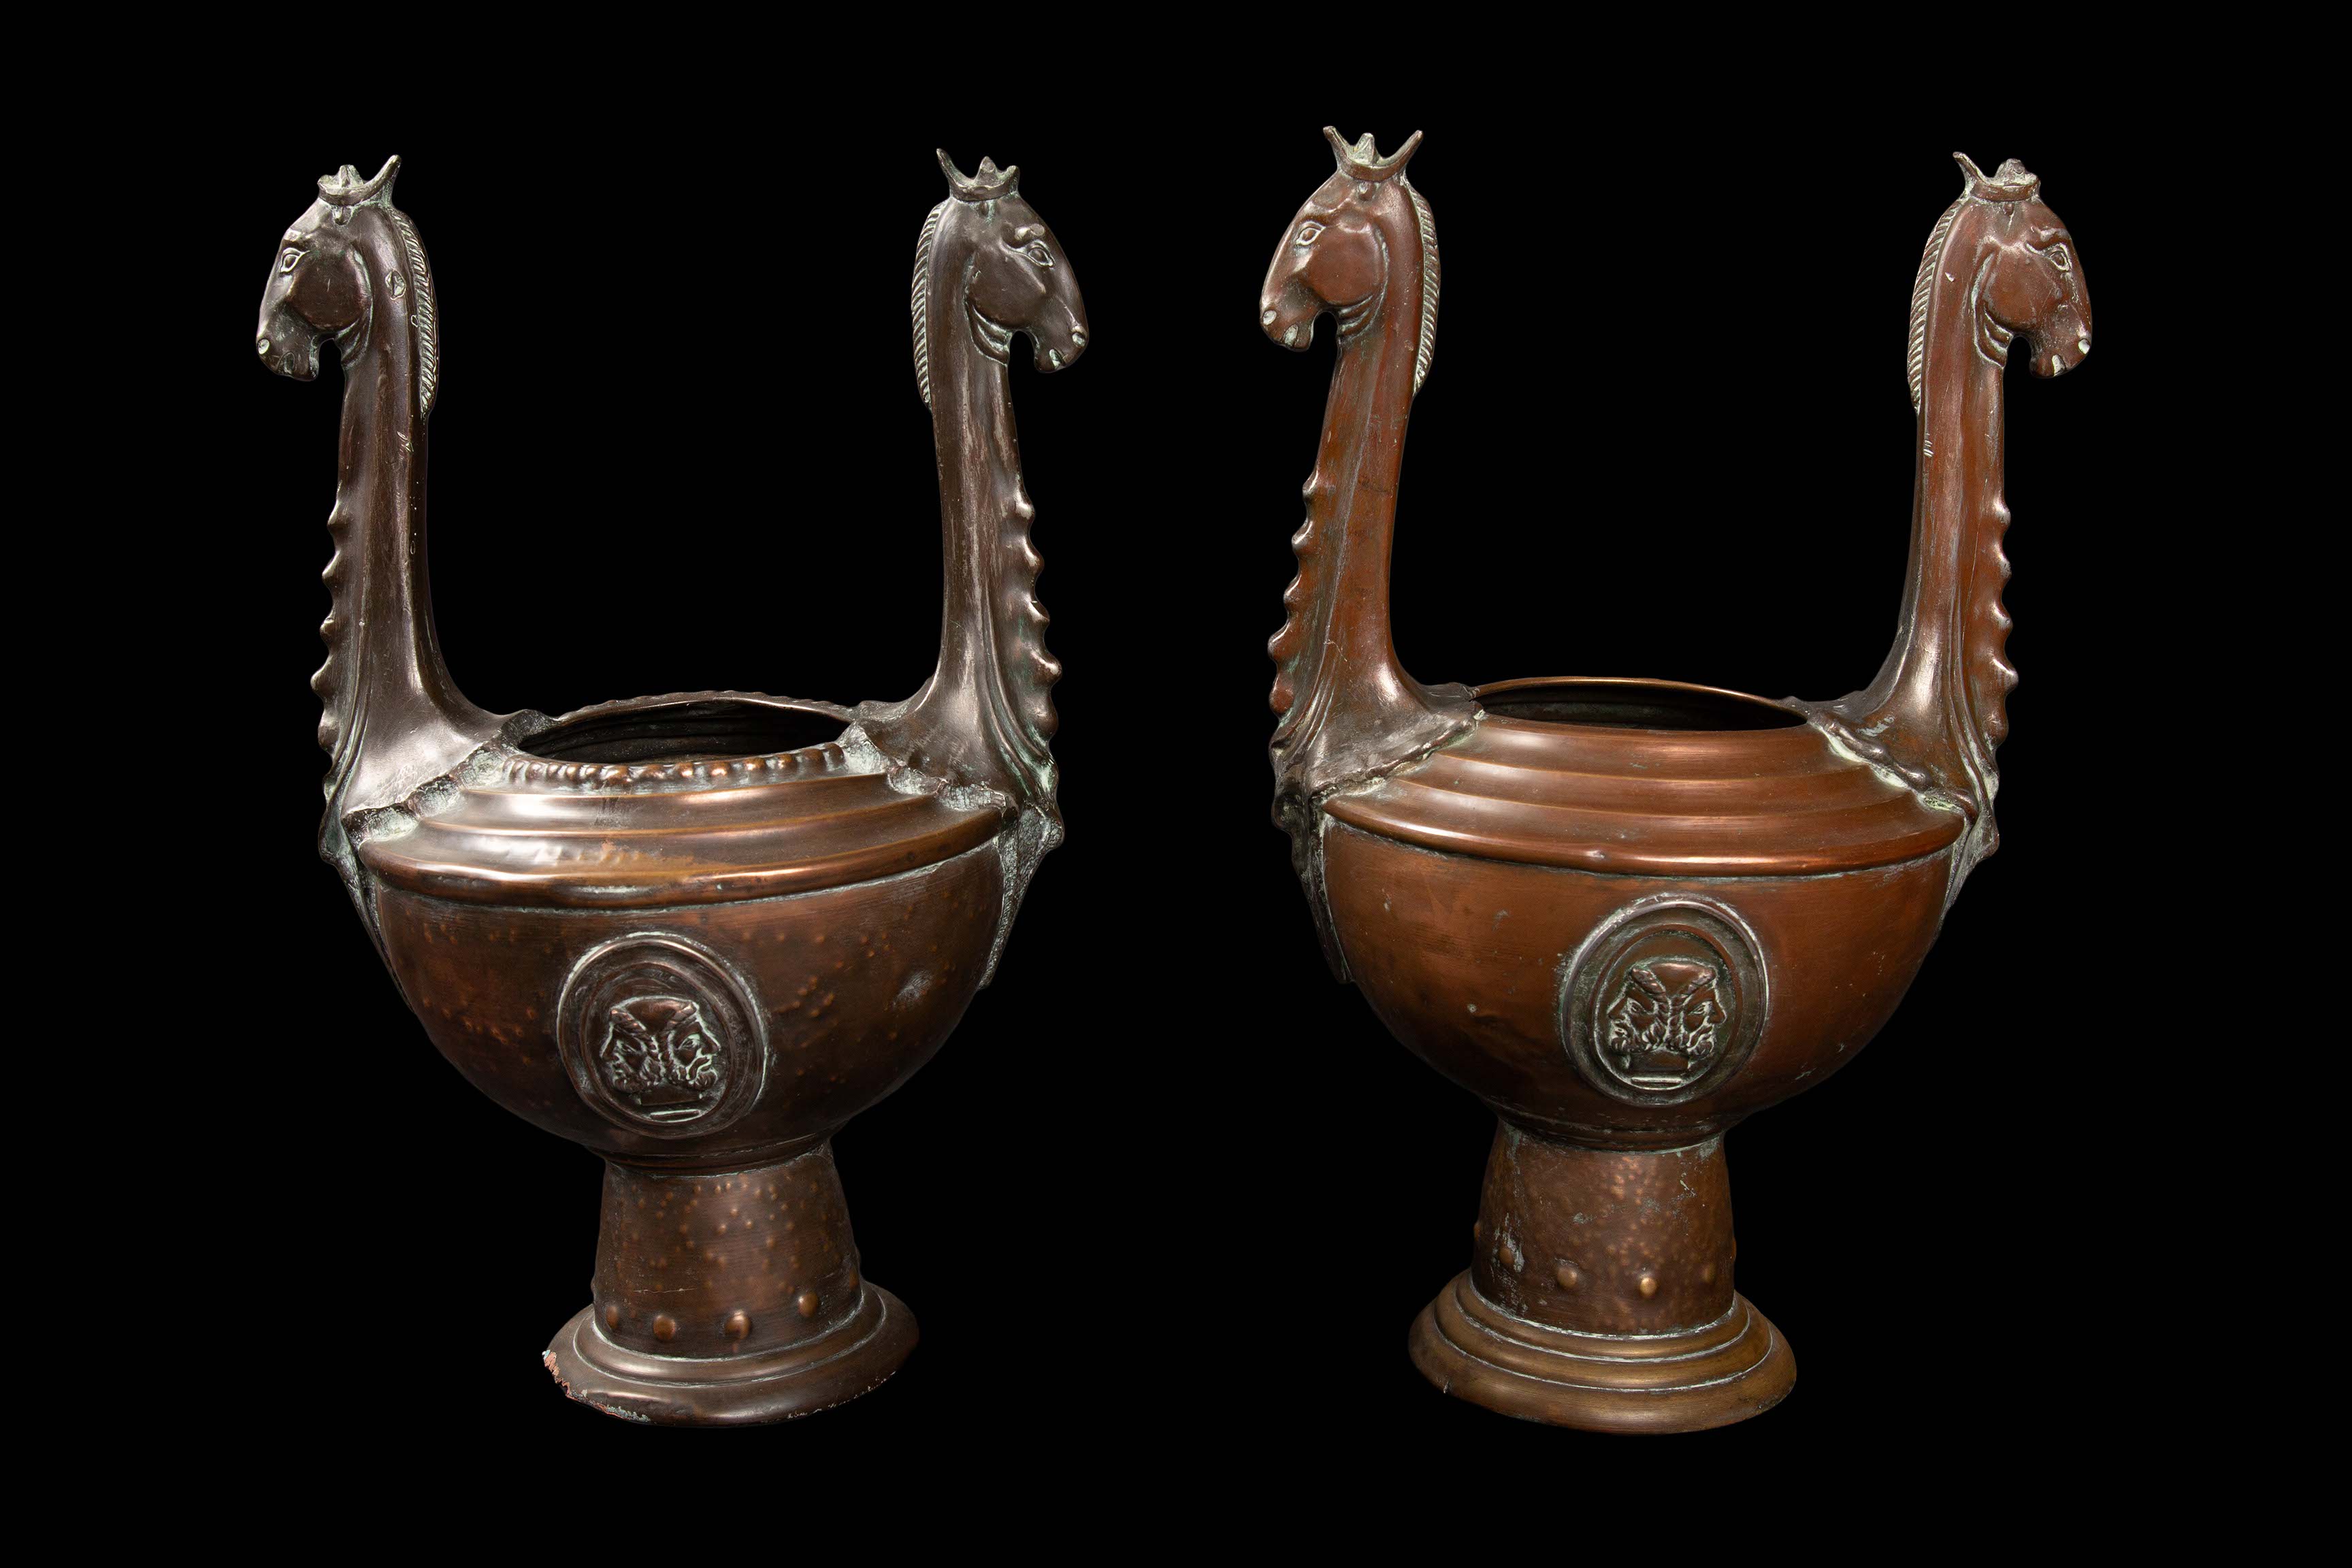 Timeless Wisdom: 19th Century Greek Owl Urns with Crowned Horse Heads